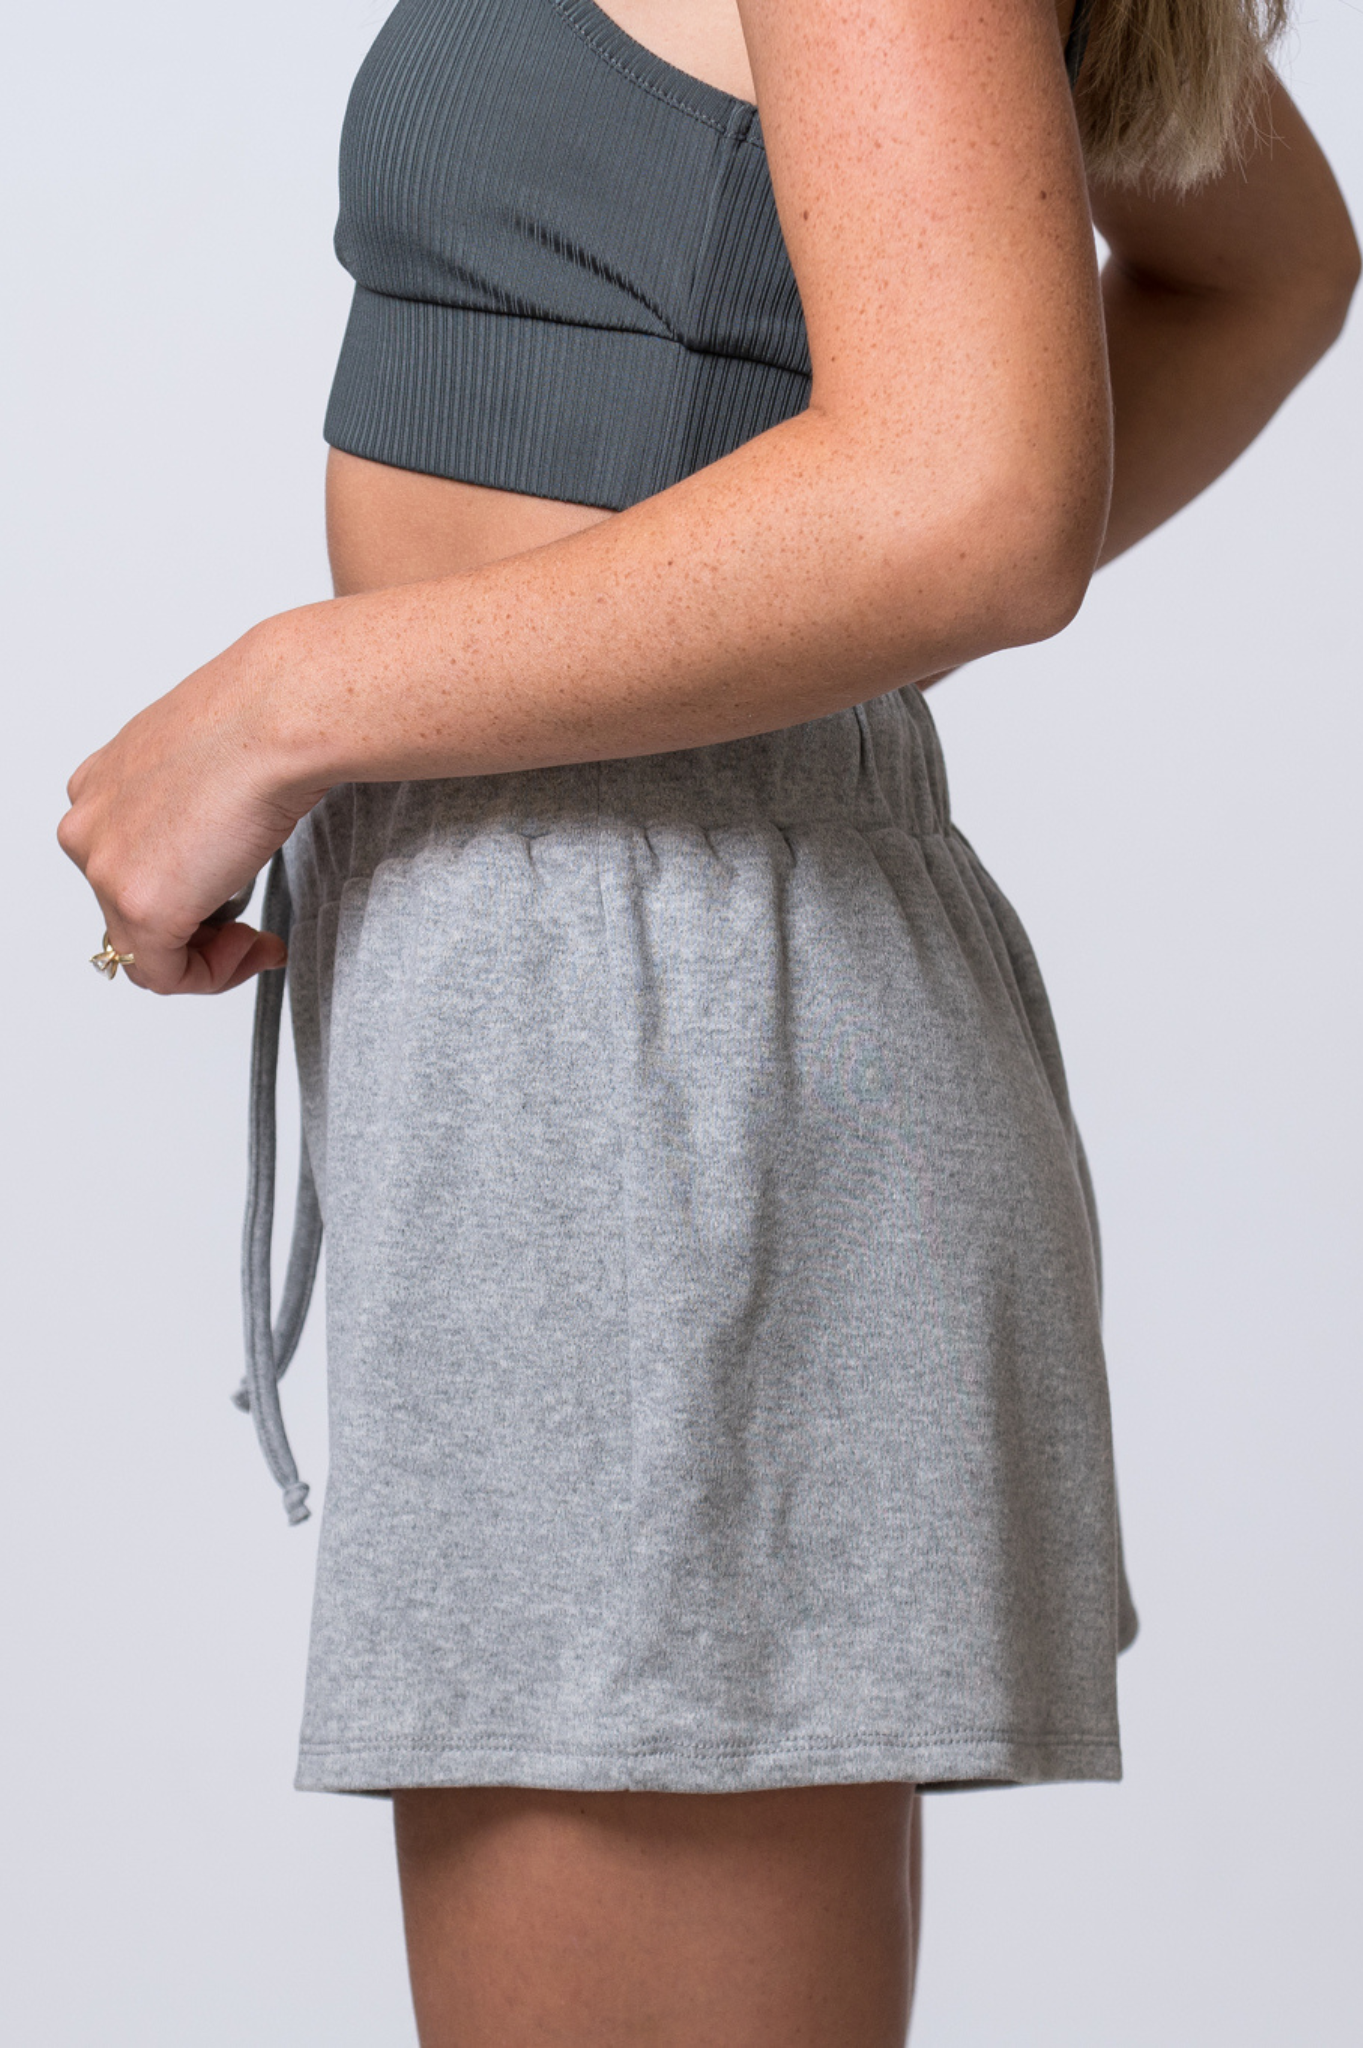 Woman wearing light gray, drawstring sweat shorts and a dark gray, ribbed sports bra. Side of clothing is being shown